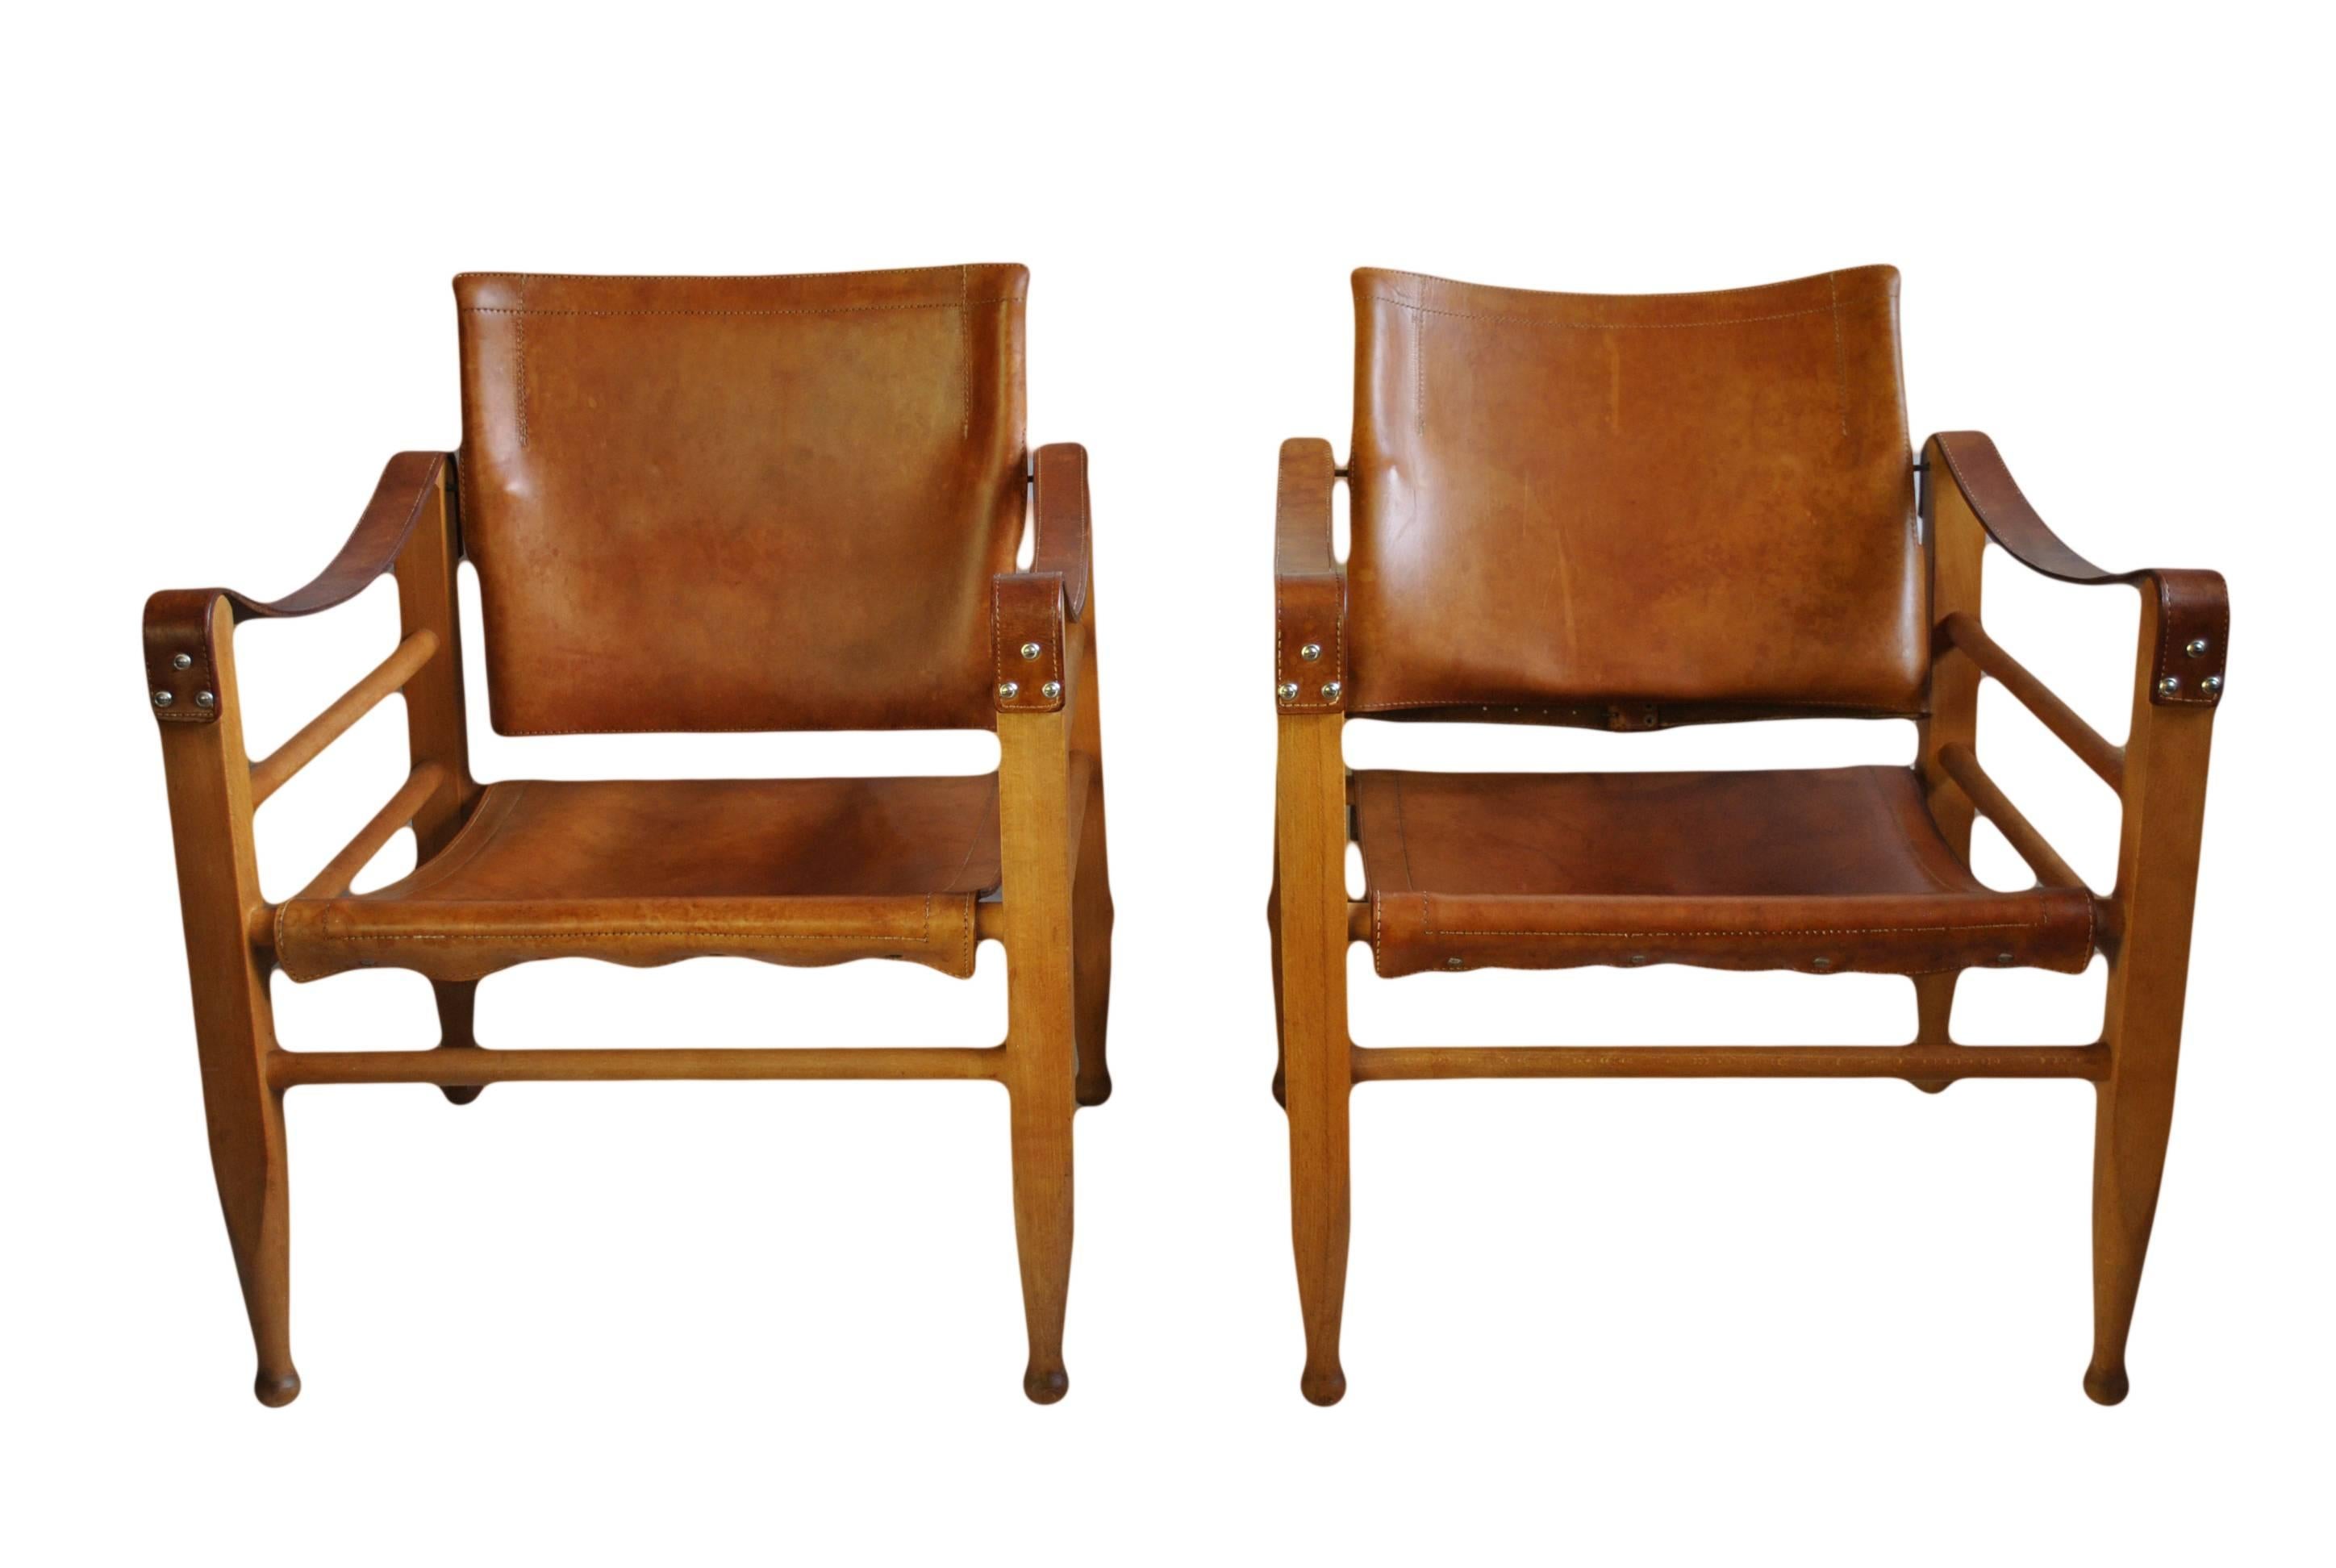 Wonderful matching pair of rare Børge Mogensen model 2221 safari chairs. Manufactured in Denmark during the 1950s.
Lovely aged cognac saddle leather on a beech frame with pivoting back rests.

Worldwide shipping available.